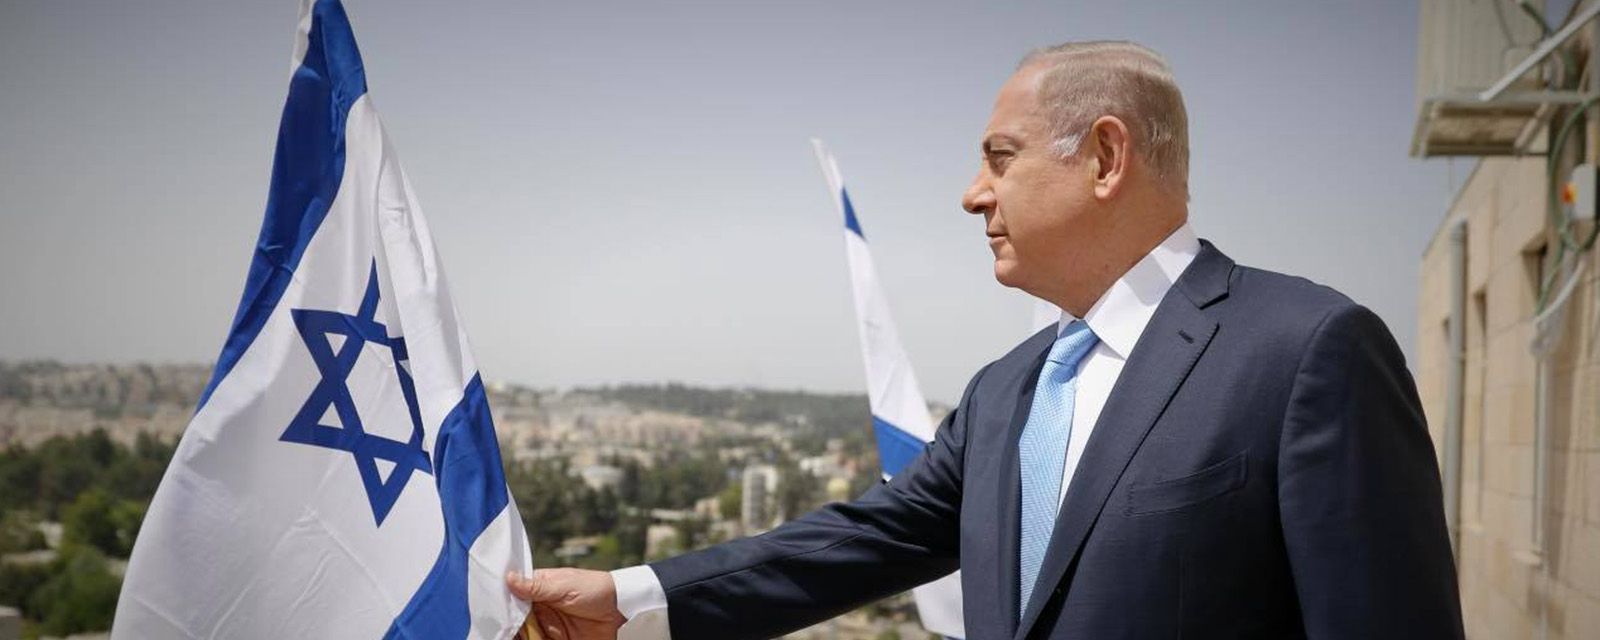 ISRAEL BECOMES FIRST STATE TO BACK AN INDEPENDENT KURDISTAN